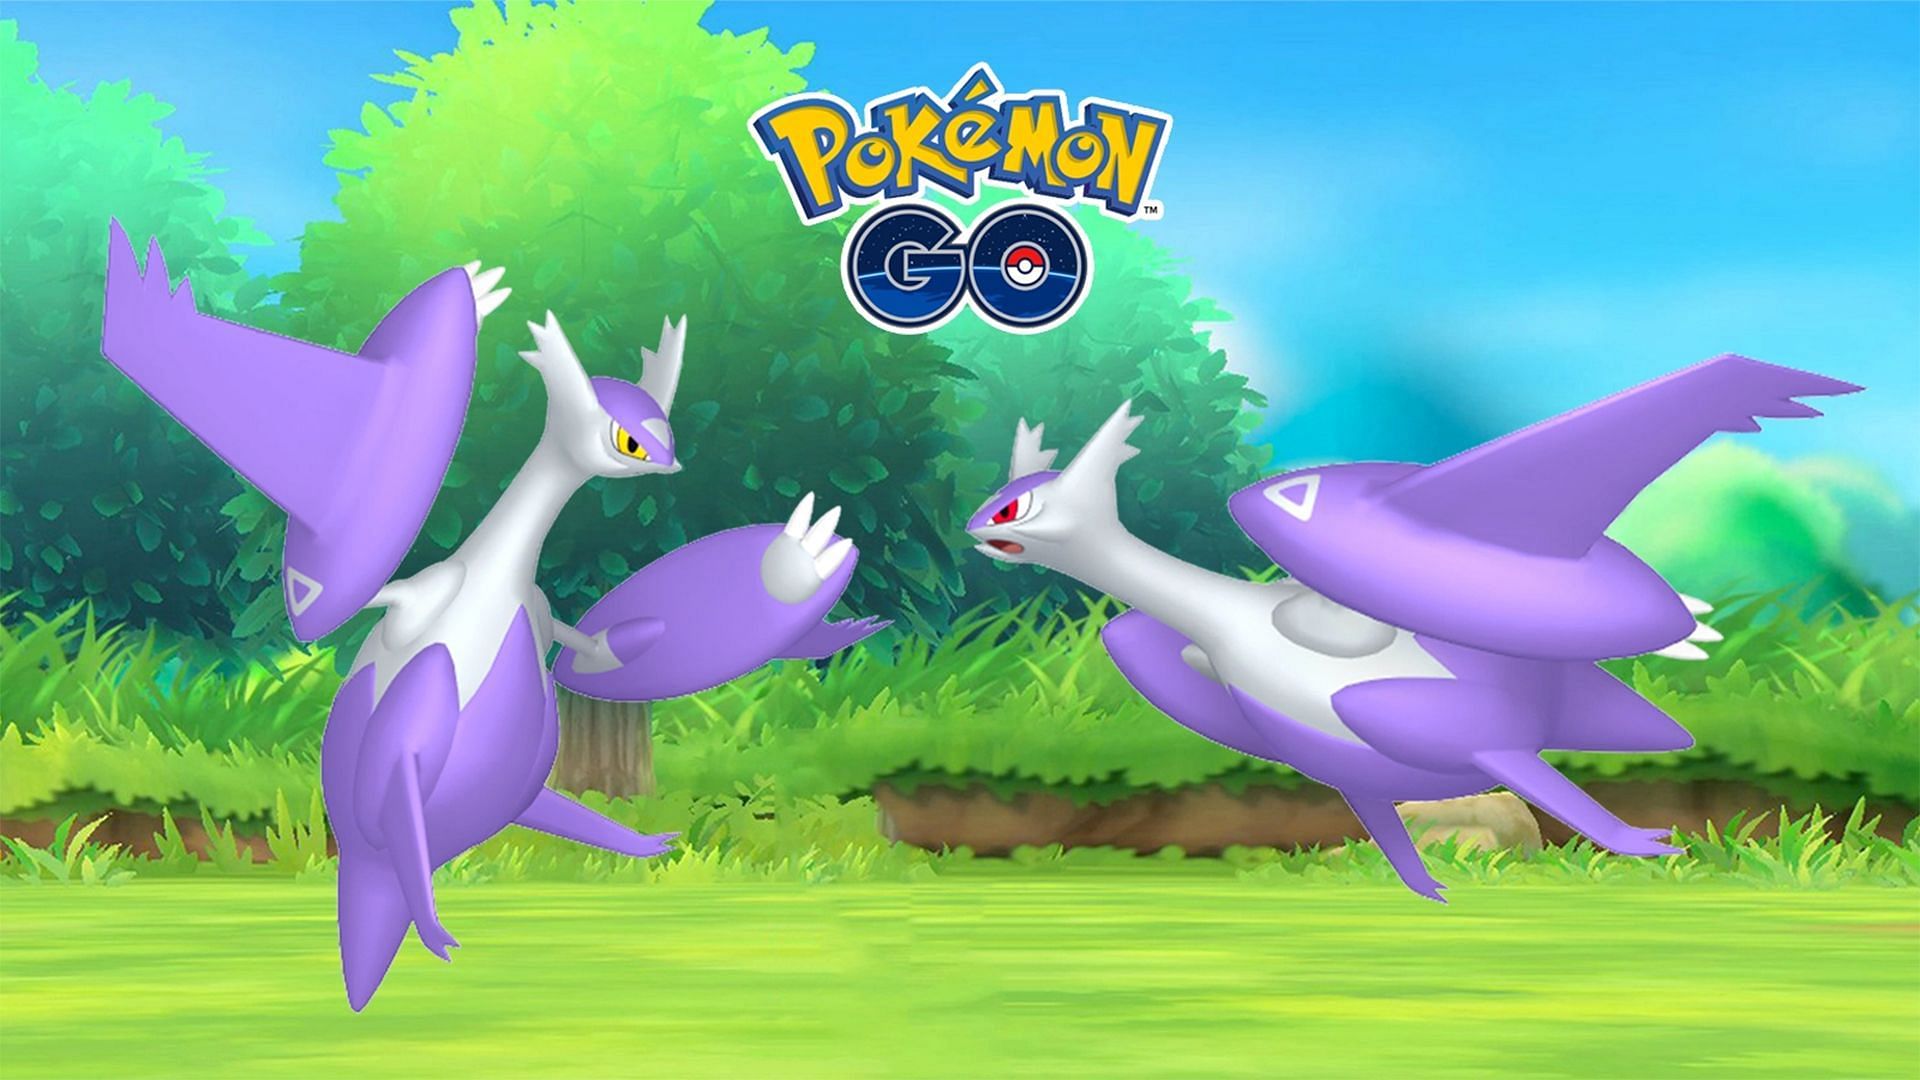 Pokemon GO Mega Latios raid guide: Best counters, weaknesses, and more